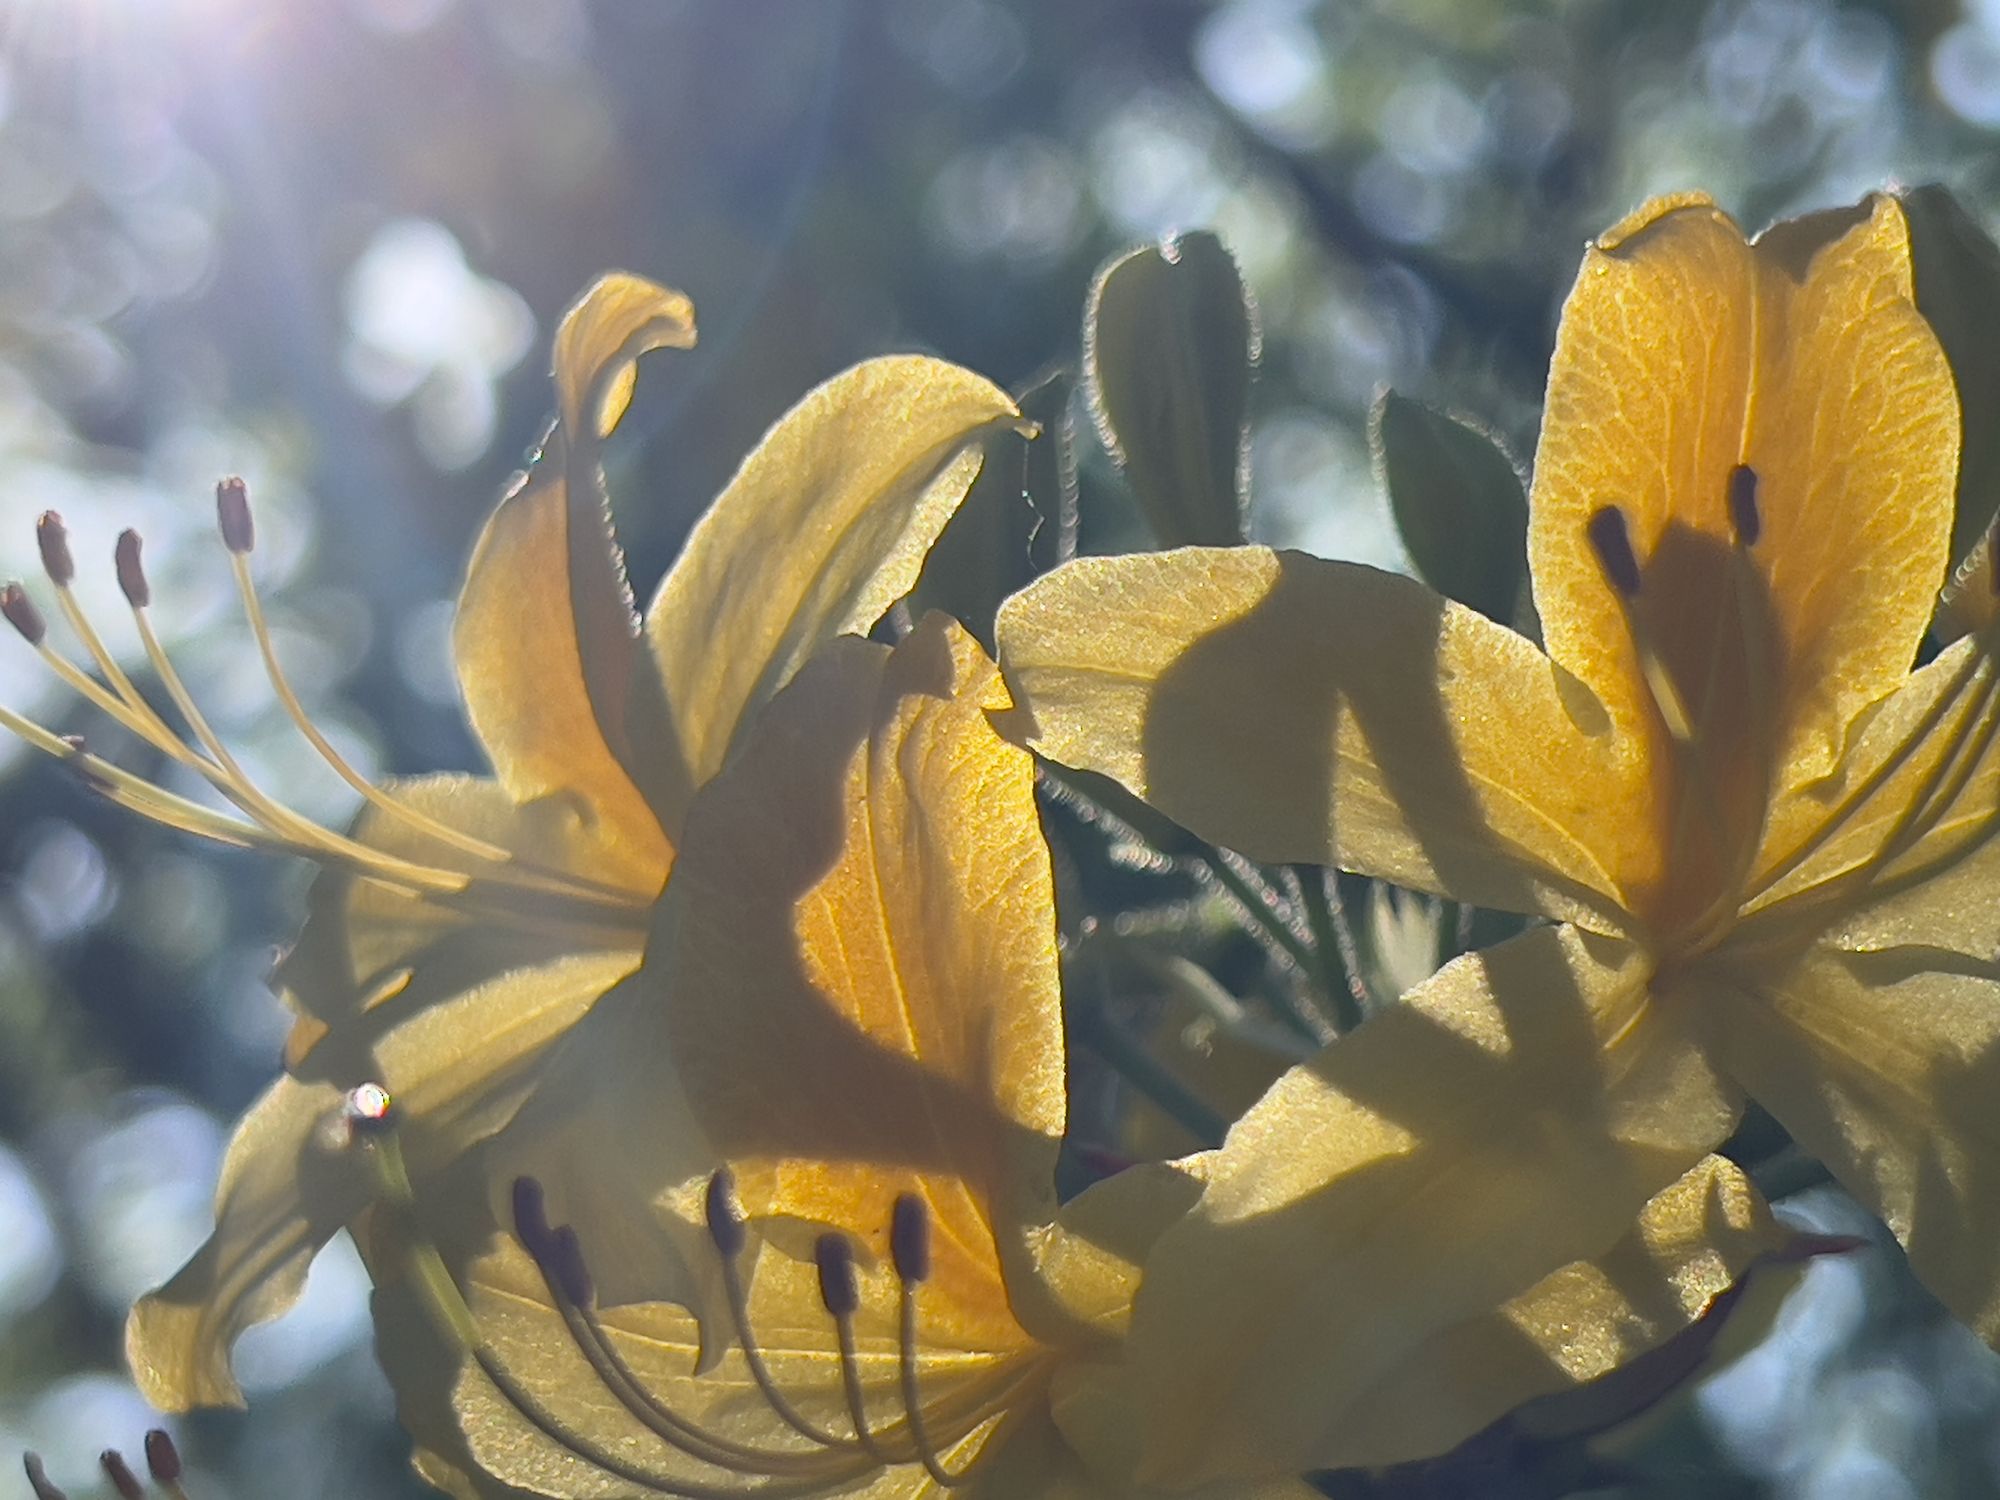 Yellow flowers with erect stamens on a tree, backlit by the sun.